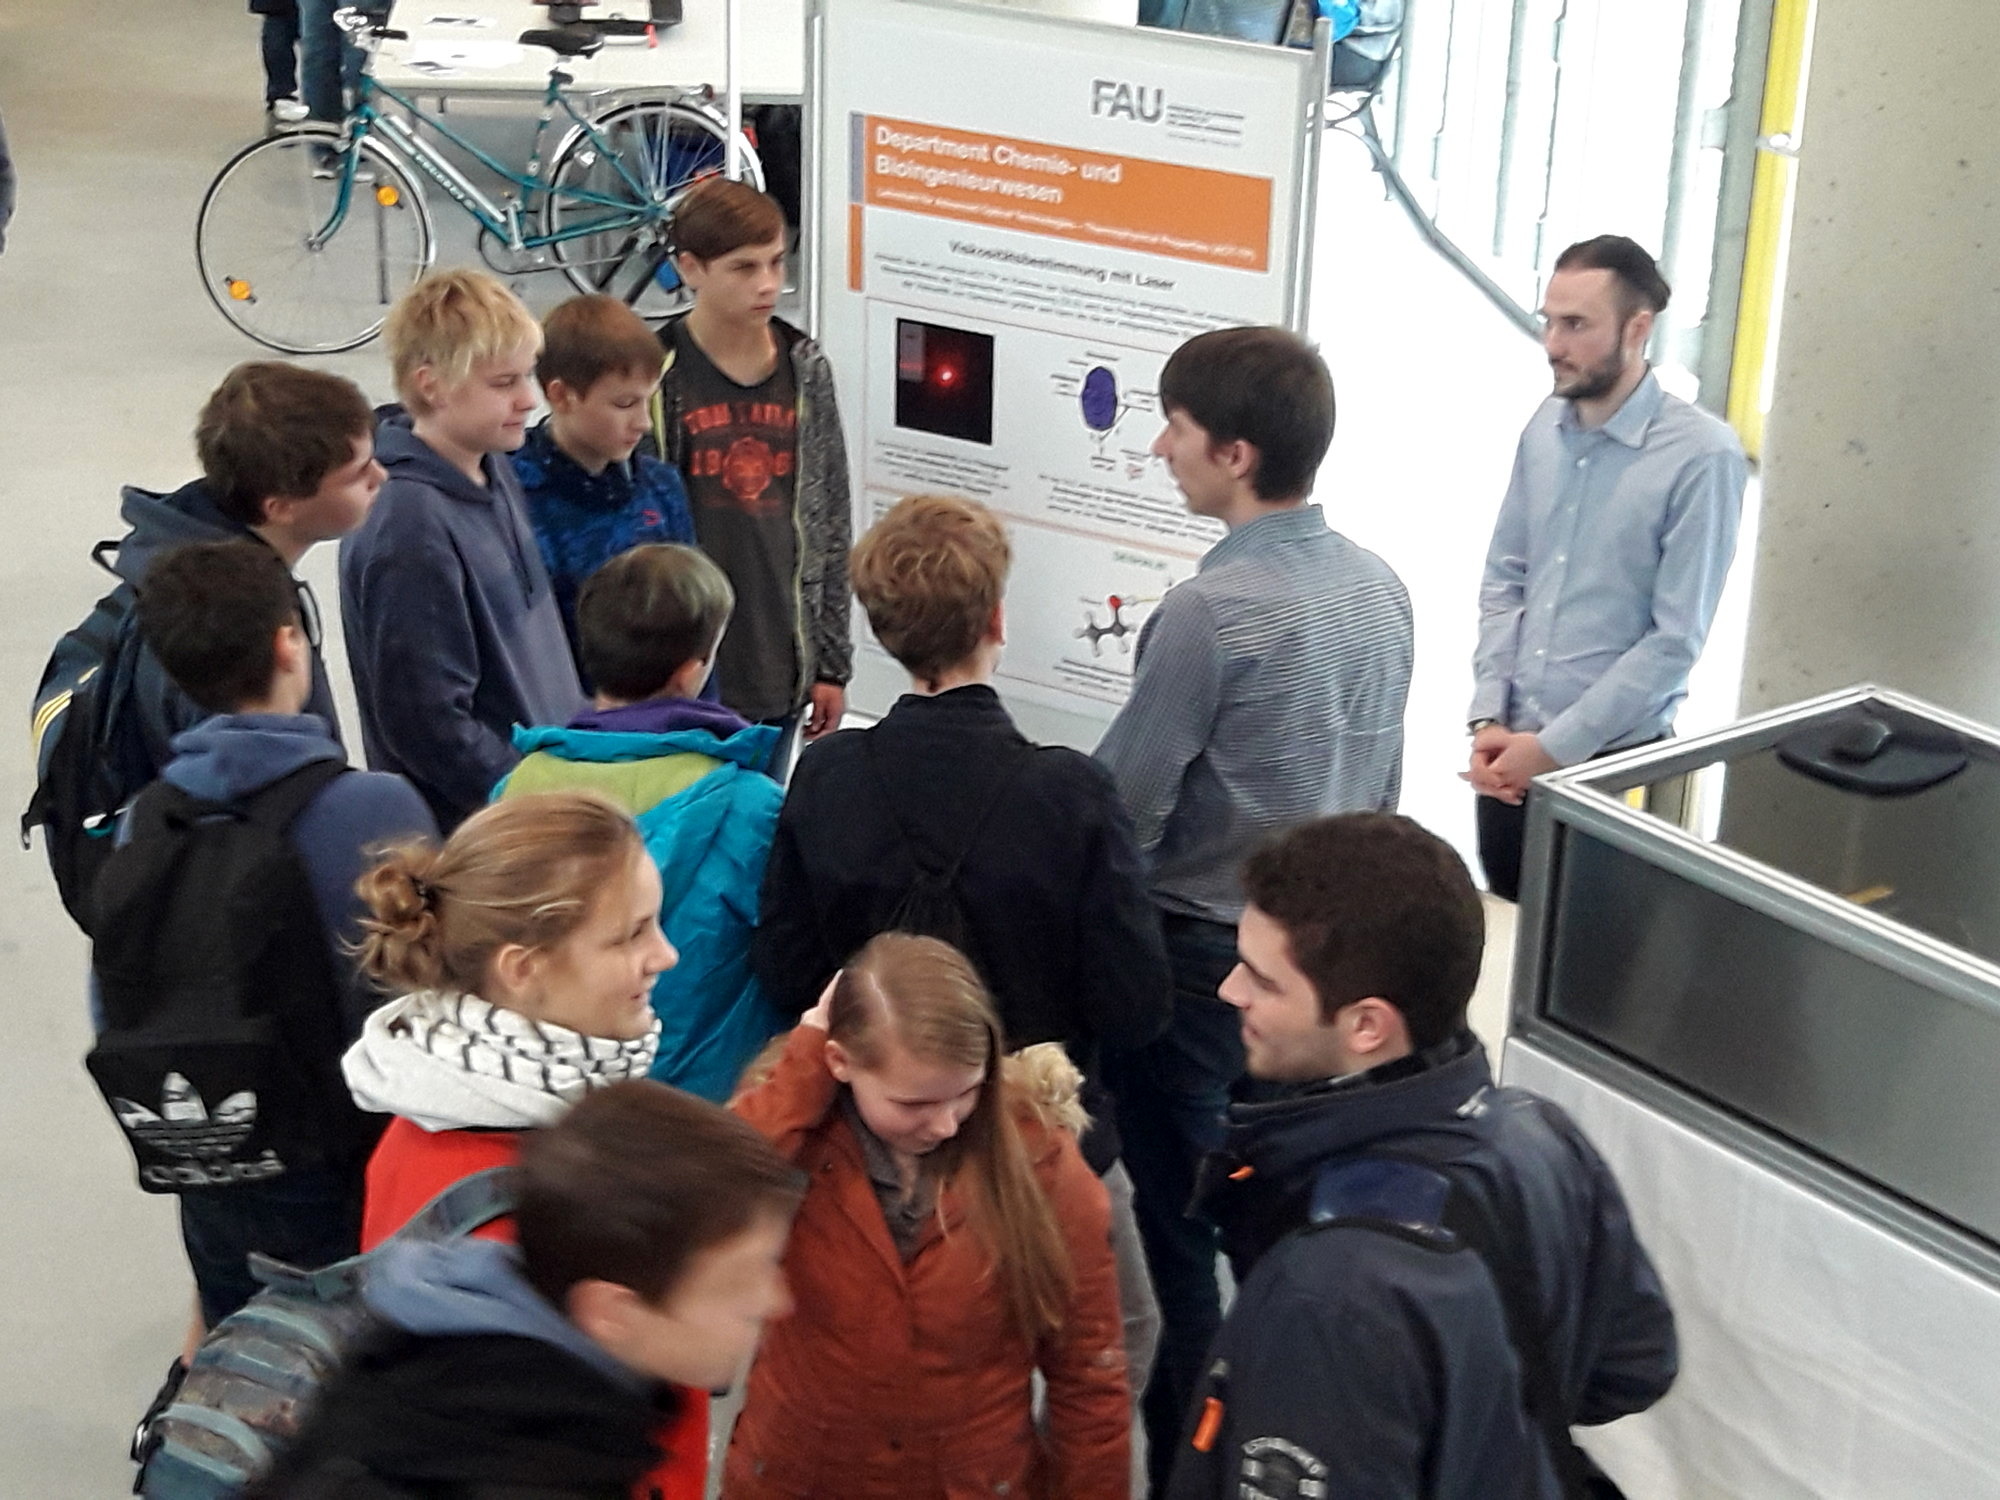 Thomas Koller and Maximilian Piszko introducing the principle of dynamic light scattering to some pupils